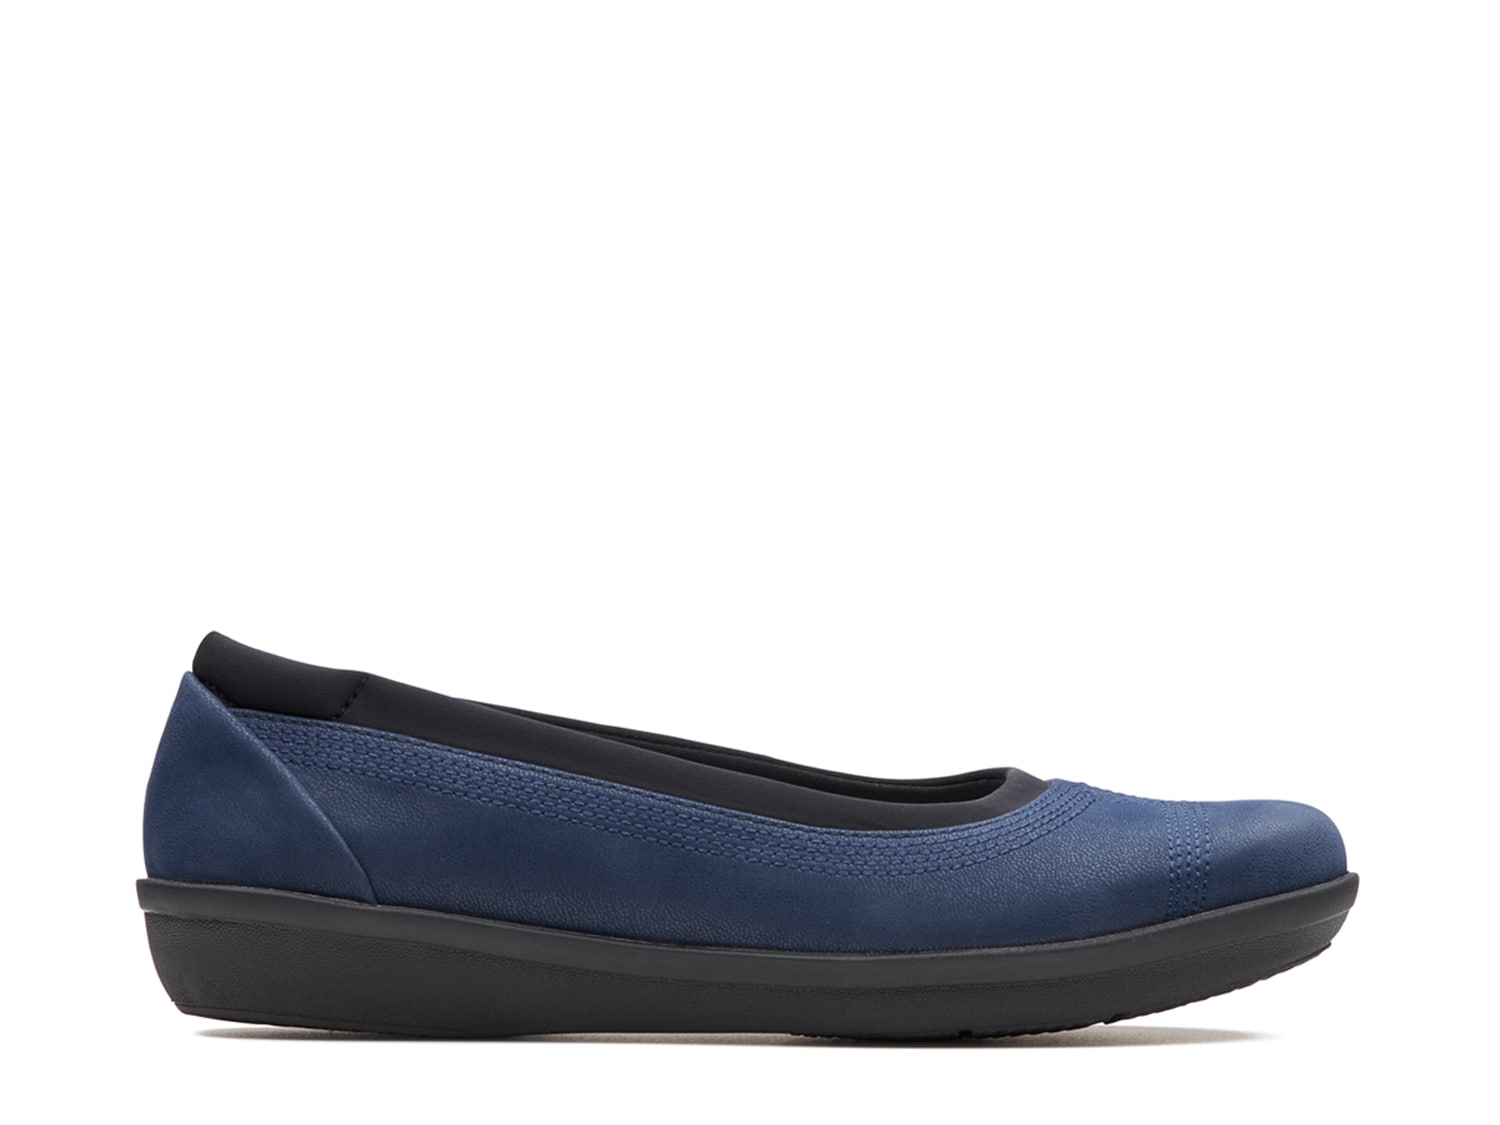 Cloudsteppers by Clarks Ayla Low Slip-On Women's Shoes | DSW